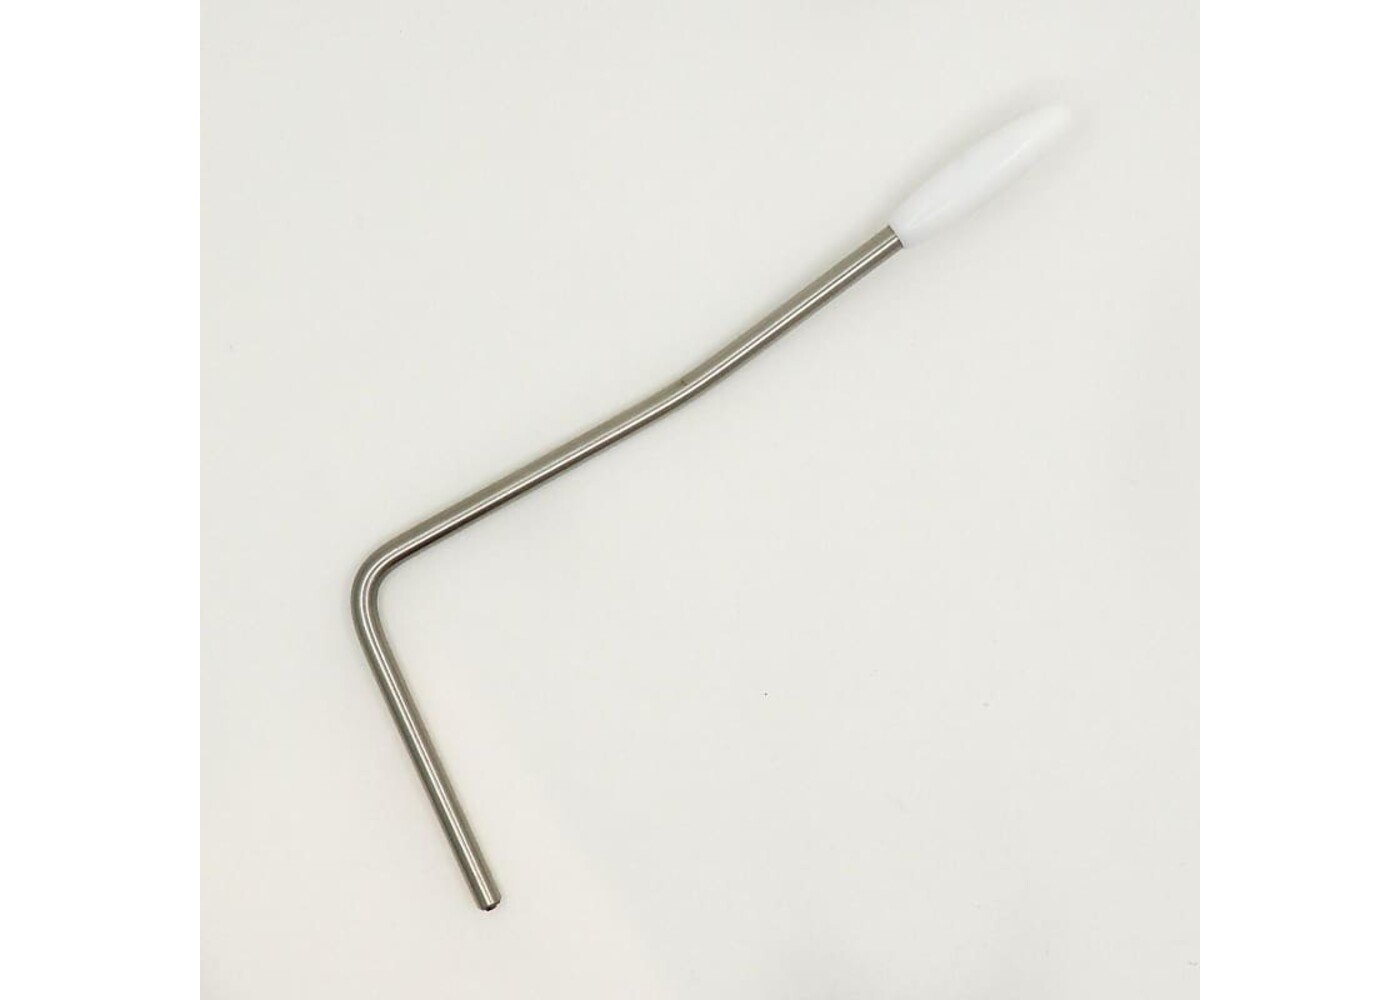 MannMade USA MannMade USA "Hi-Rise" Tremolo Bridge Arm - Left hand - Stainless Steel - Metric